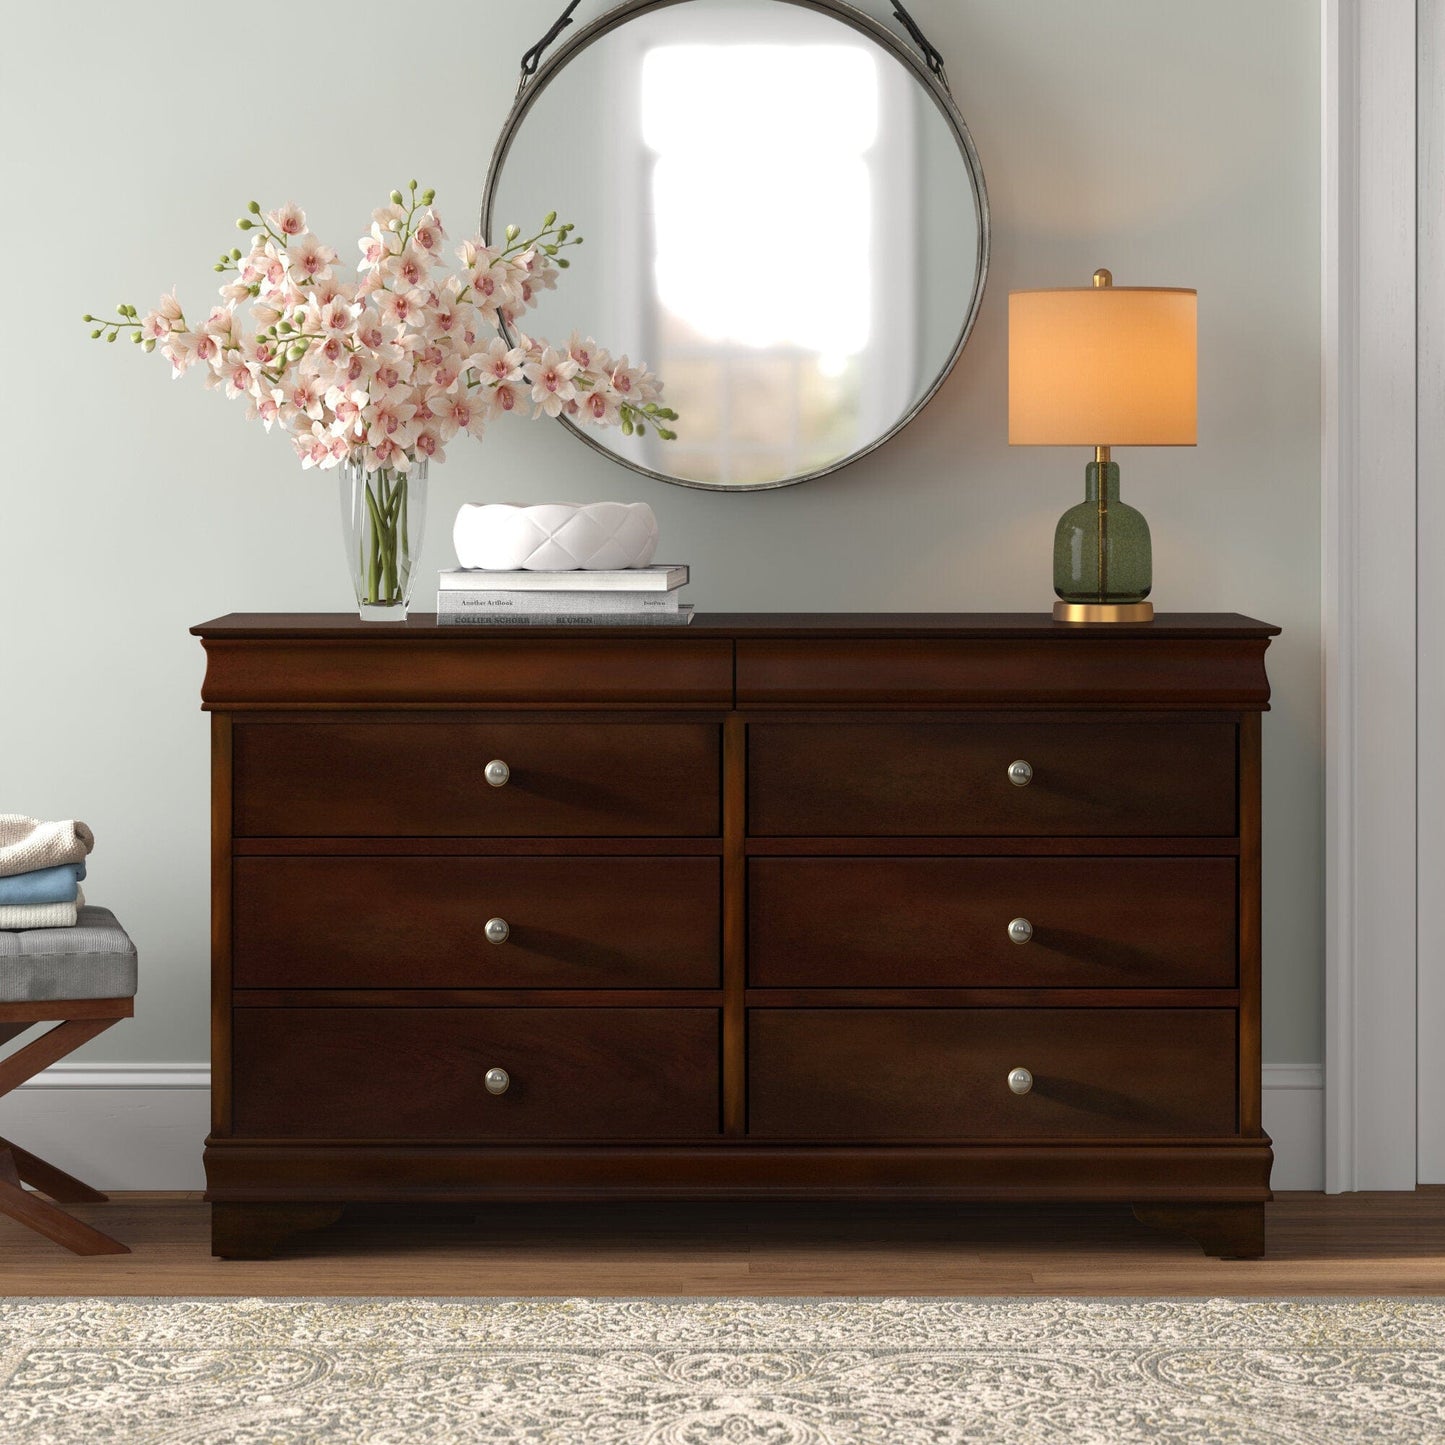 Brown Cherry Finish Louis Phillipe Style Bedroom Furniture 1pc Dresser of 6x Drawers Hidden Drawers Wooden Furniture